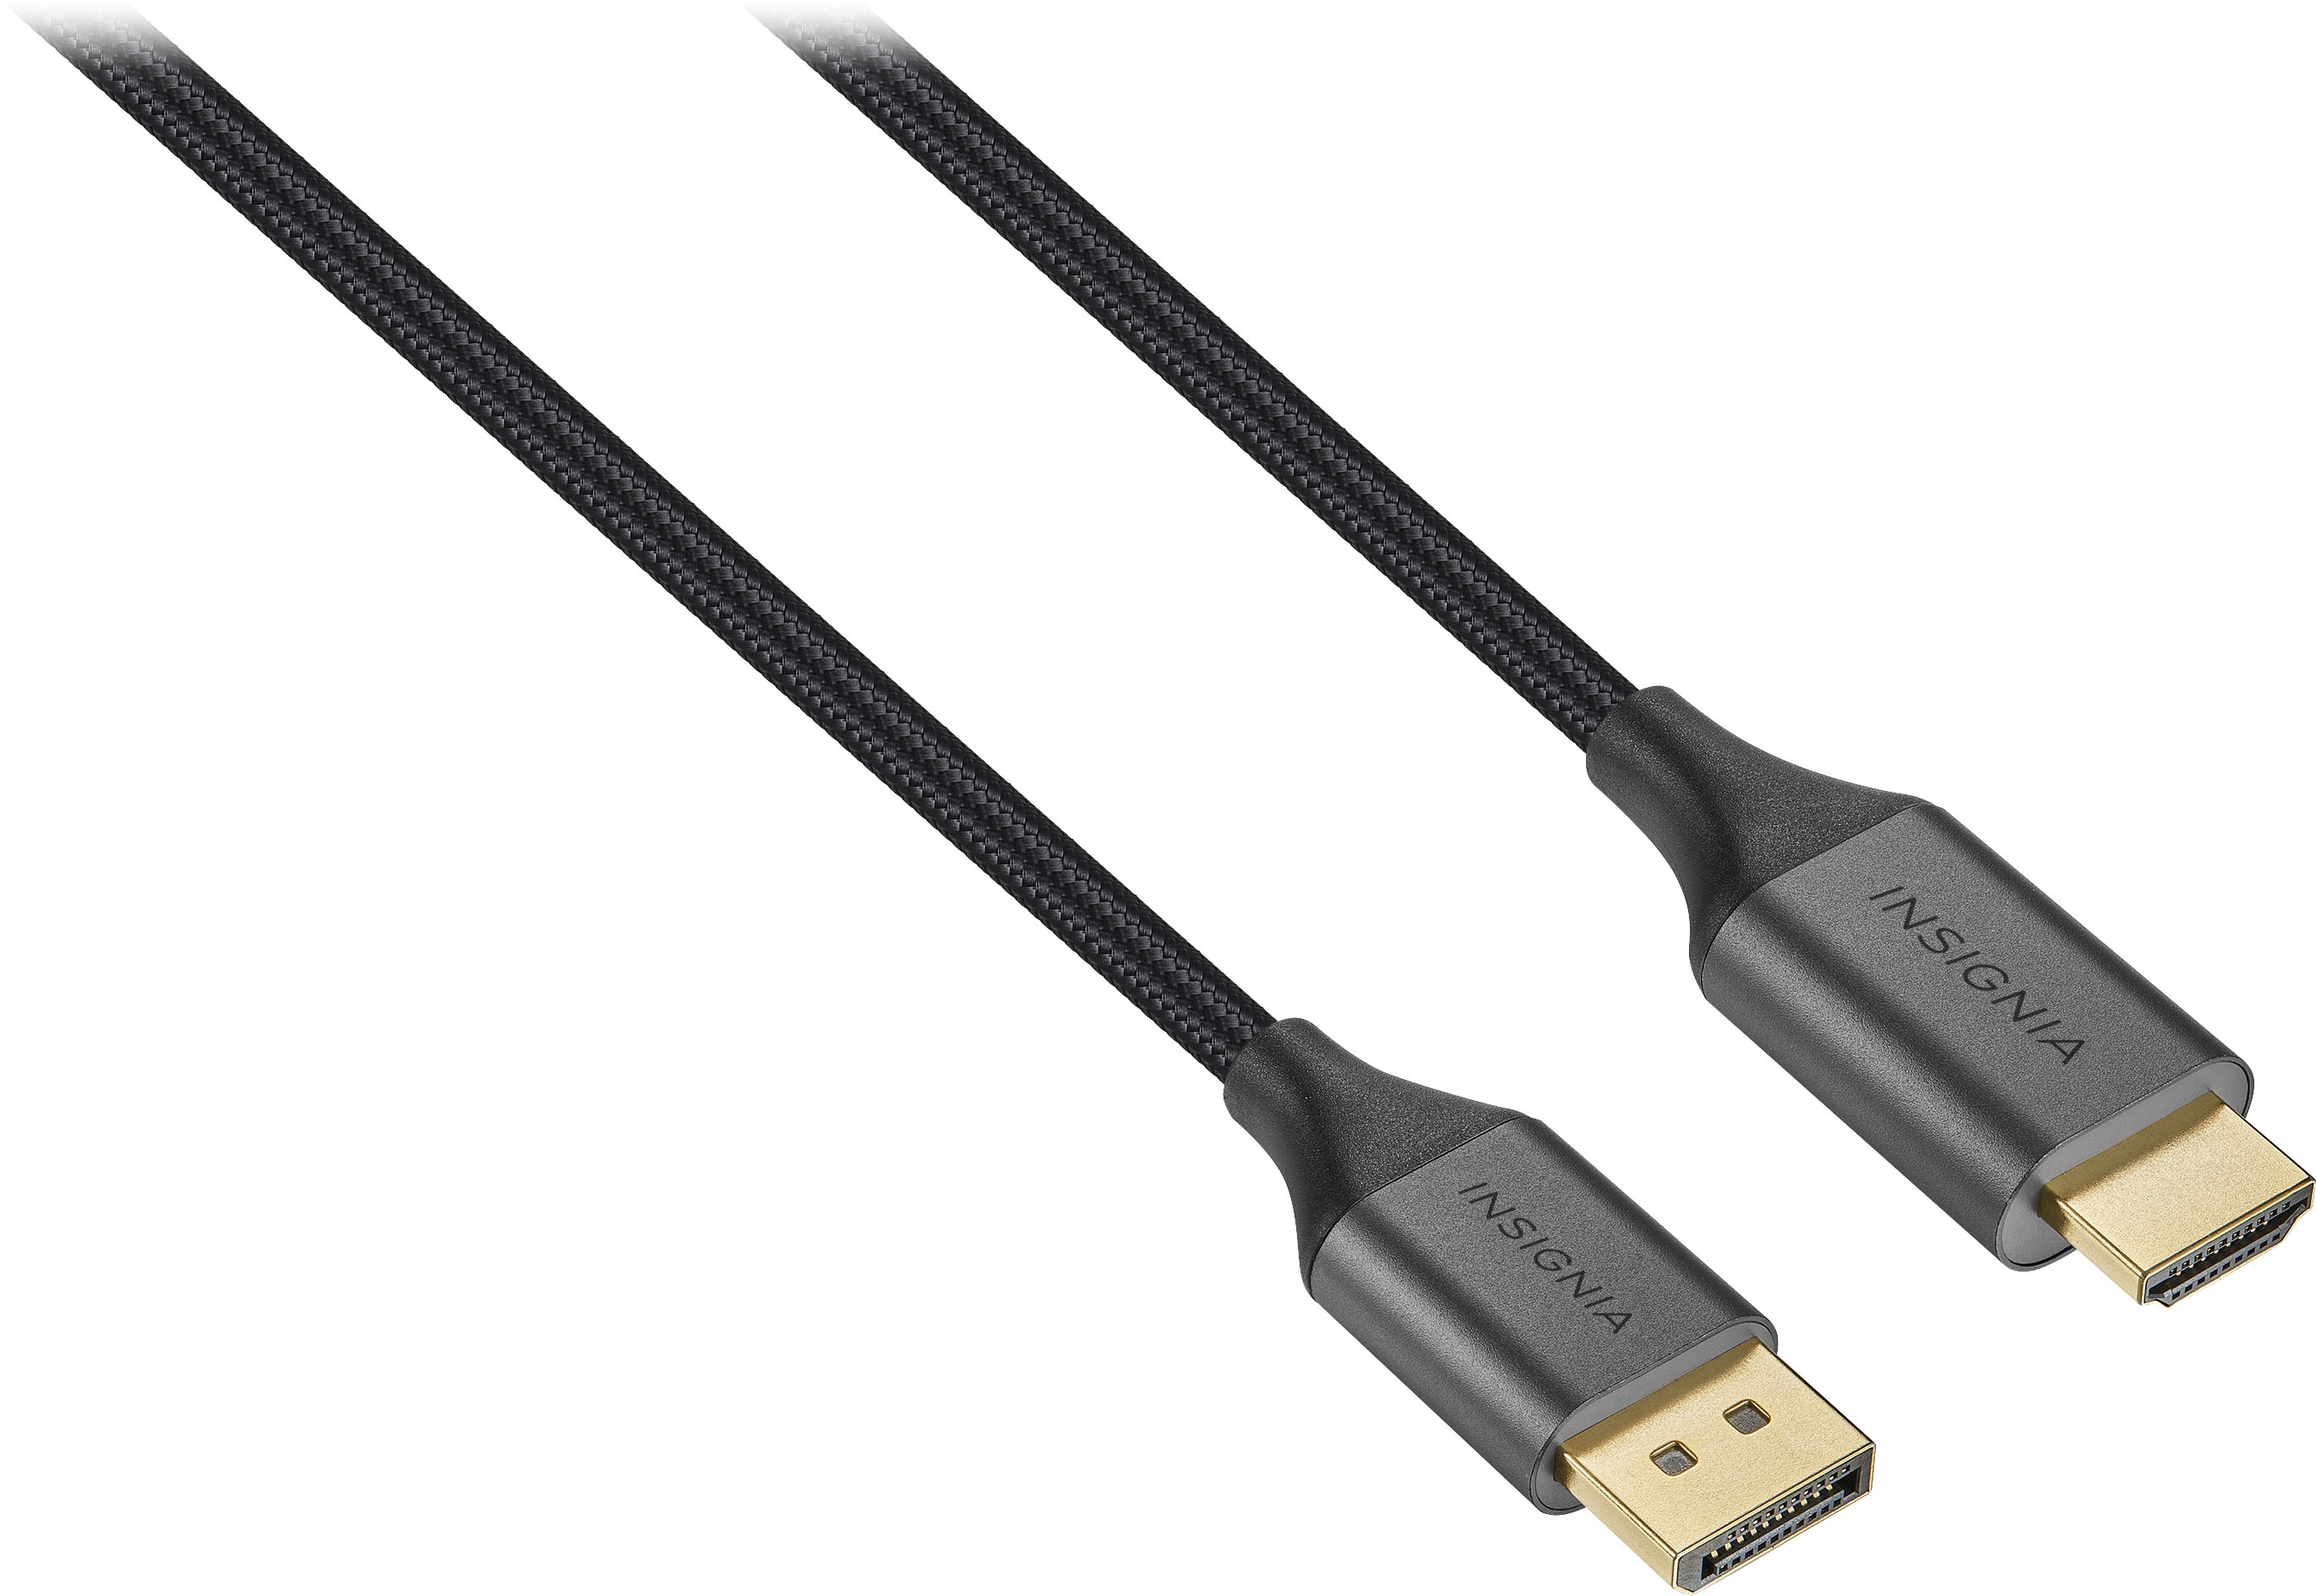 Insignia™ 6' DVI-D to HDMI Cable Black NS-PCHDDV6 - Best Buy